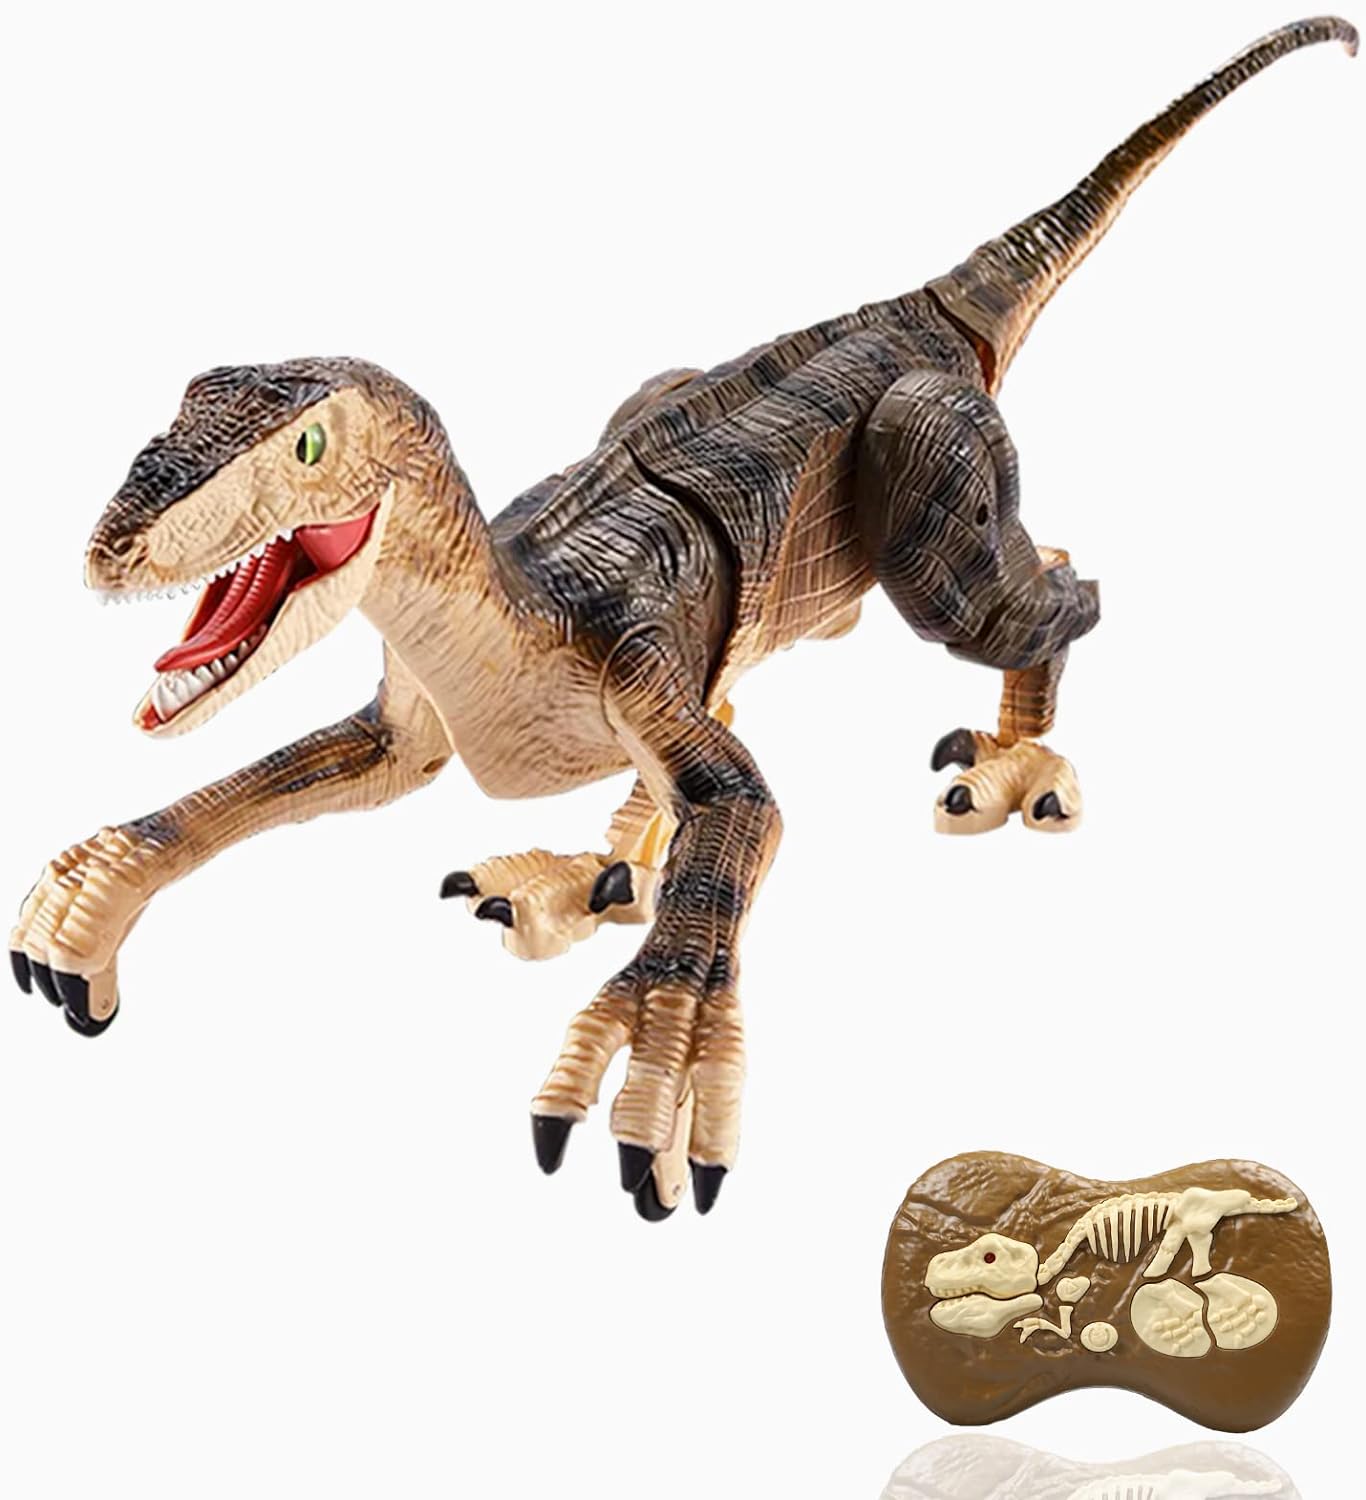 Trovono Remote Control Dinosaur Toy: A Roaring Review of Fun and Adventure